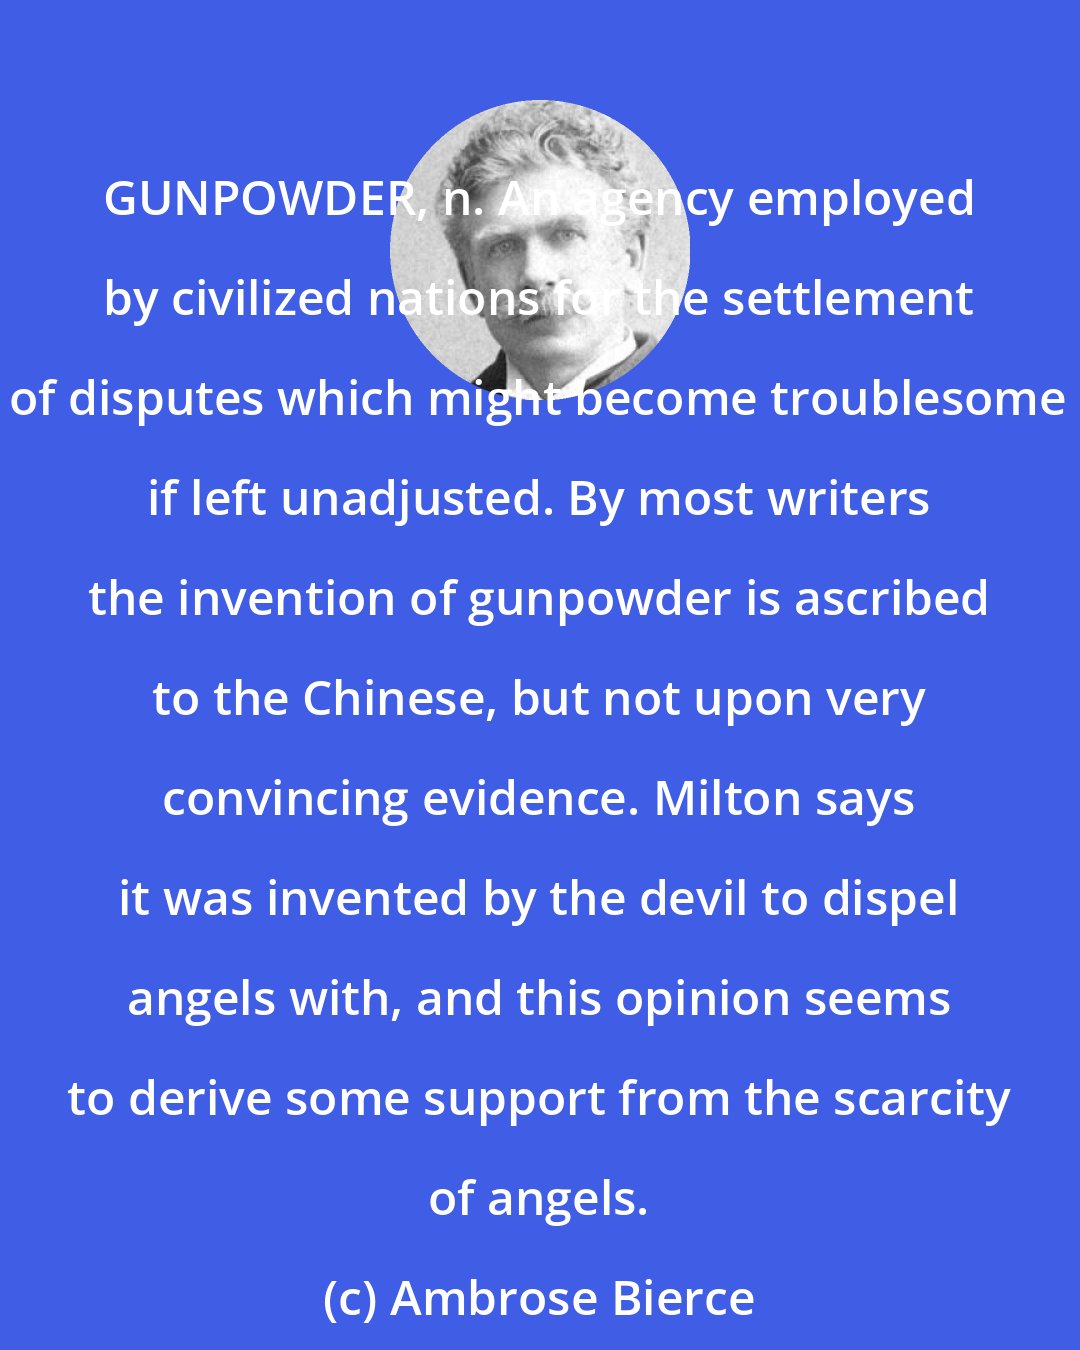 Ambrose Bierce: GUNPOWDER, n. An agency employed by civilized nations for the settlement of disputes which might become troublesome if left unadjusted. By most writers the invention of gunpowder is ascribed to the Chinese, but not upon very convincing evidence. Milton says it was invented by the devil to dispel angels with, and this opinion seems to derive some support from the scarcity of angels.